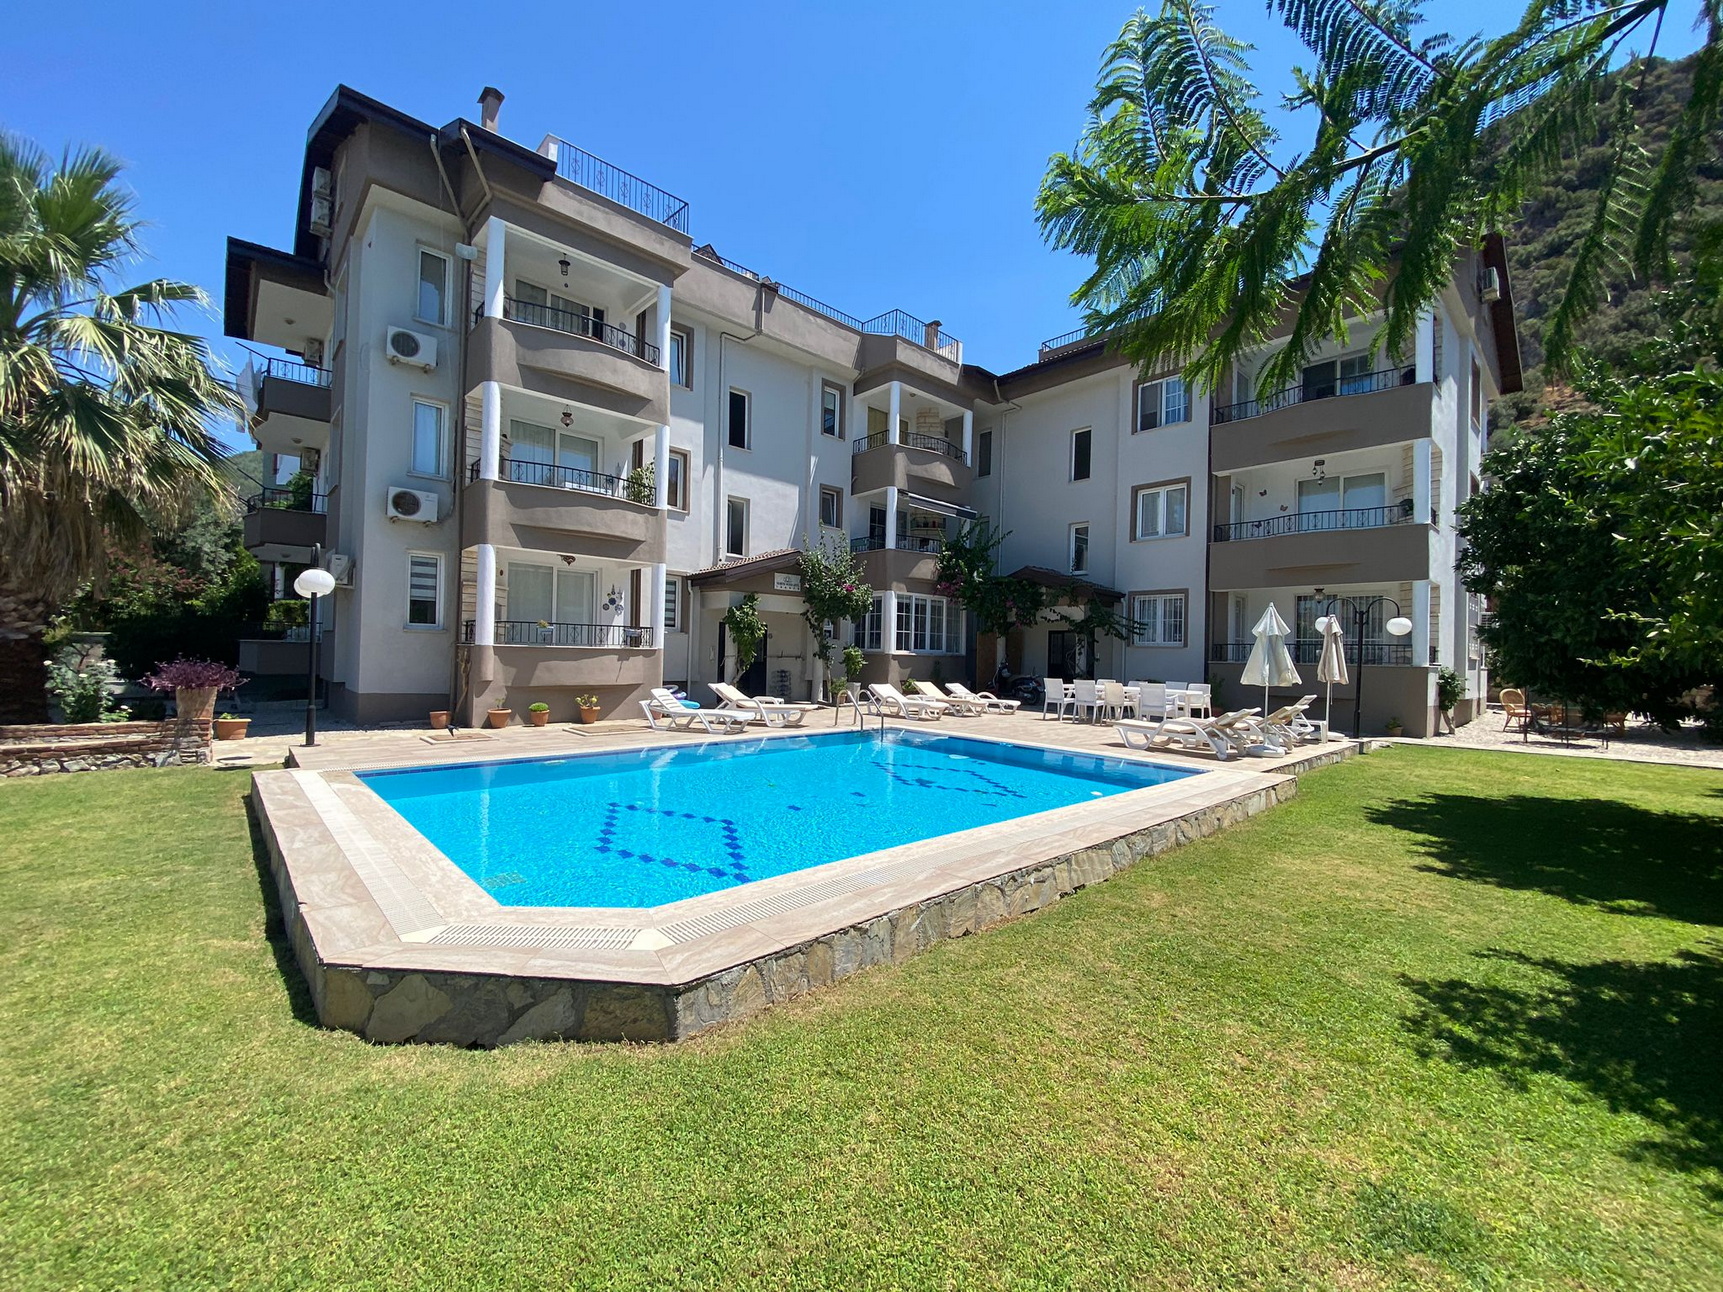 2 Bedroom Apartment for Sale with Shared Pool in Fethiye